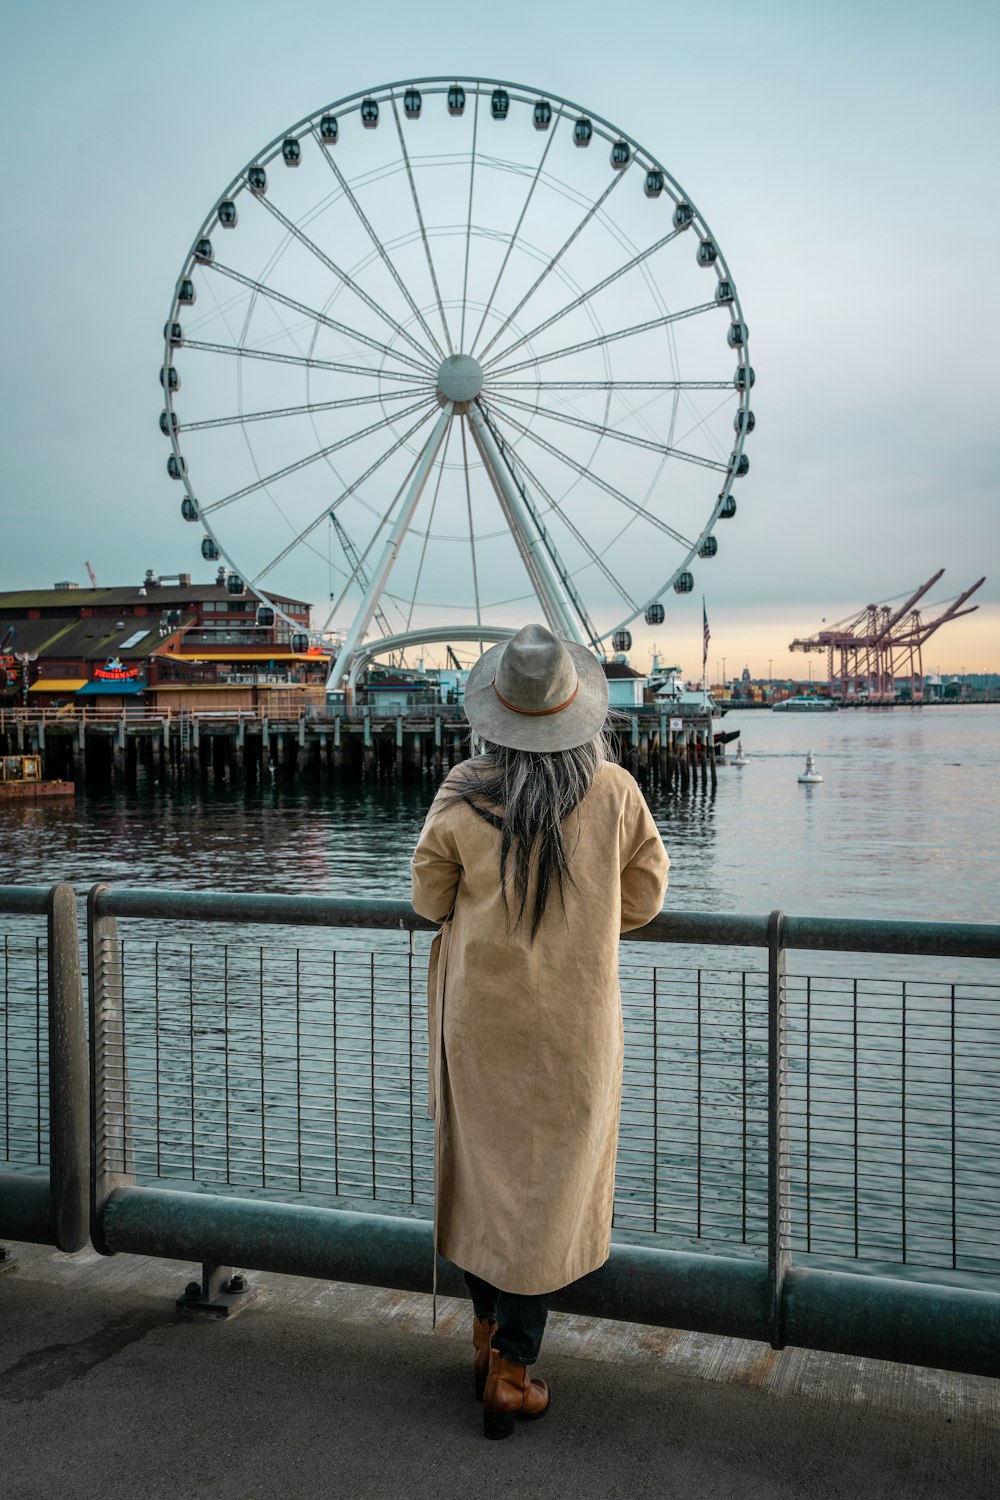 a woman looking at a ferris wheel on a pier